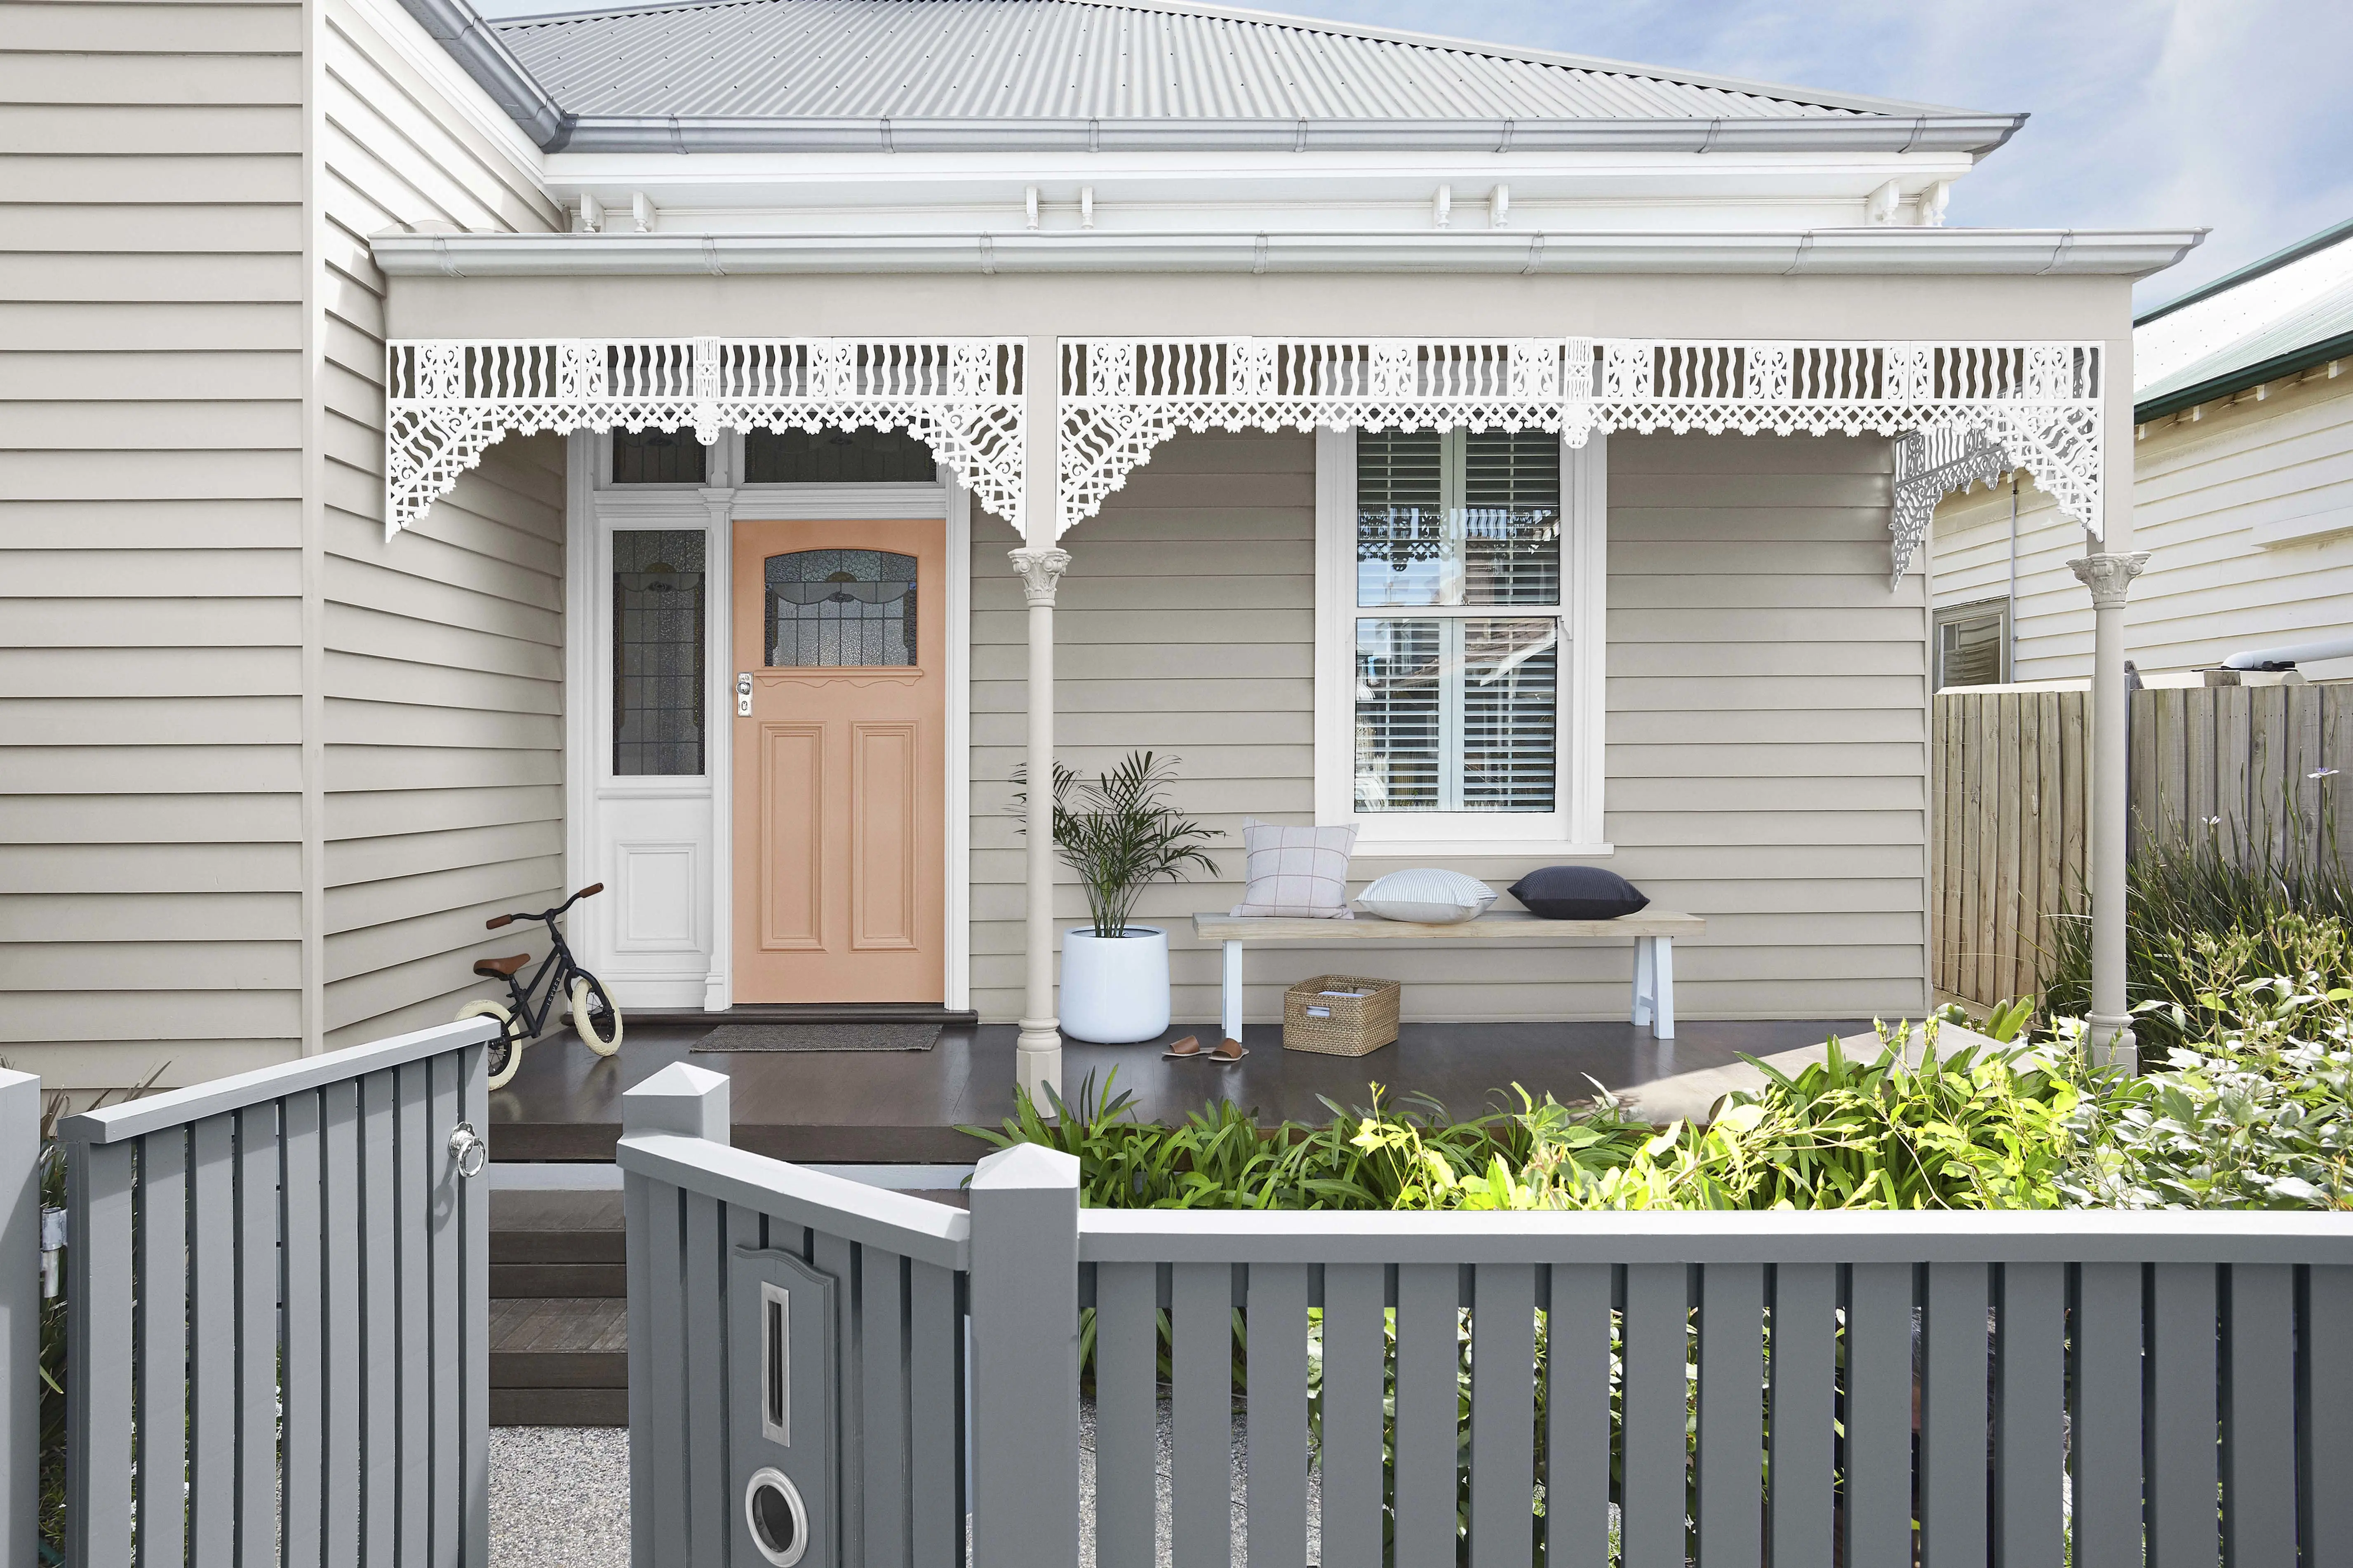 Neutrally painted exterior of home with picket fence in front and peach coloured front door.